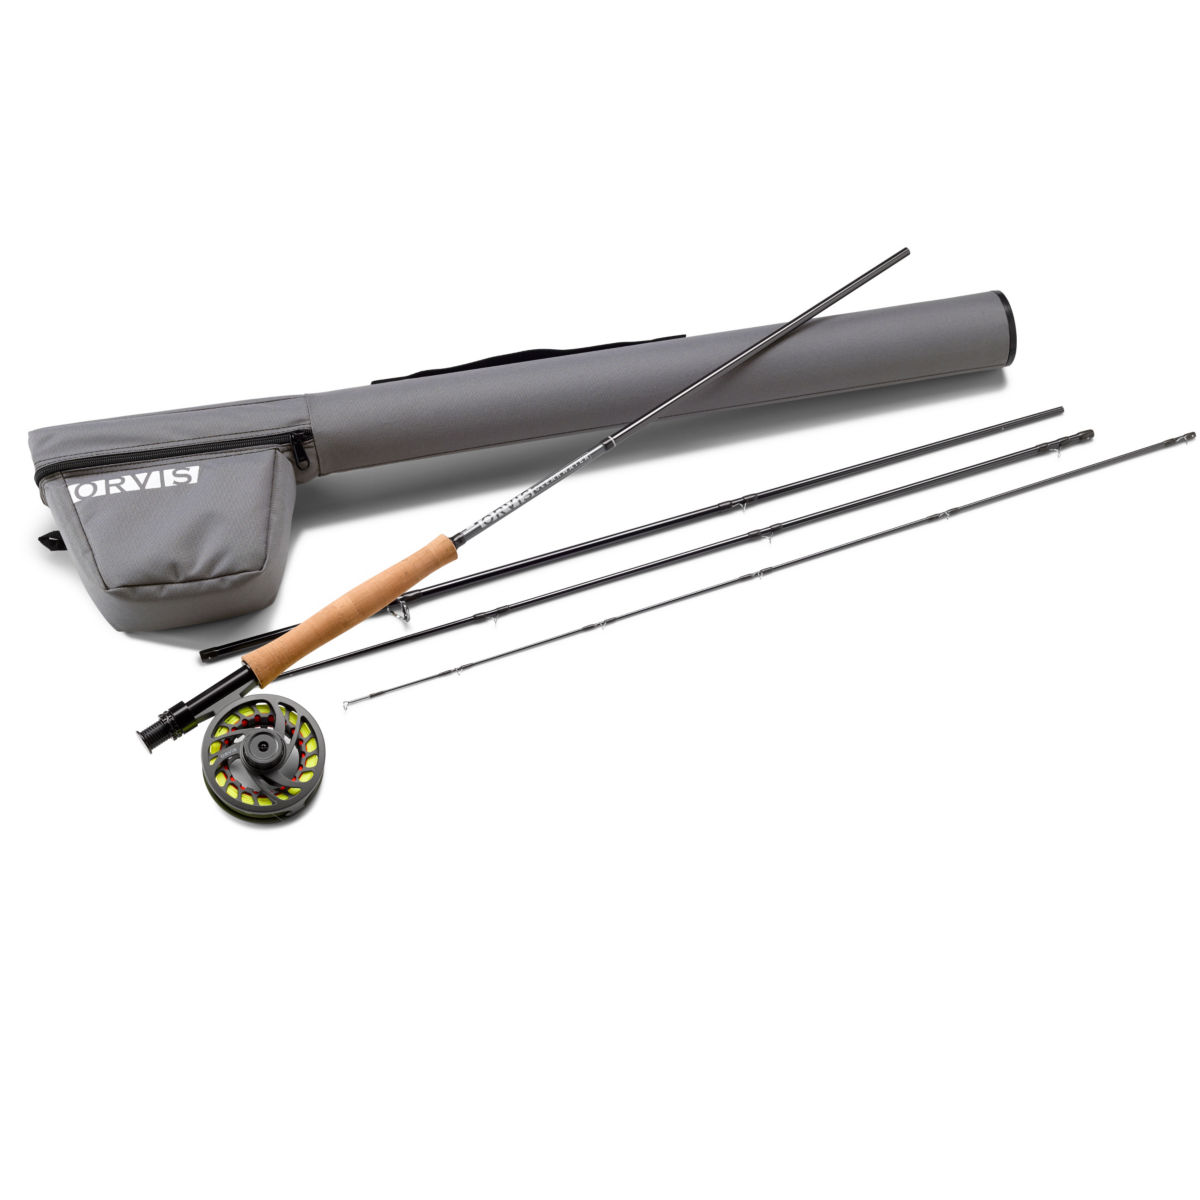 Orvis Encounter Fly Fishing Rod Outfit Choose Model 